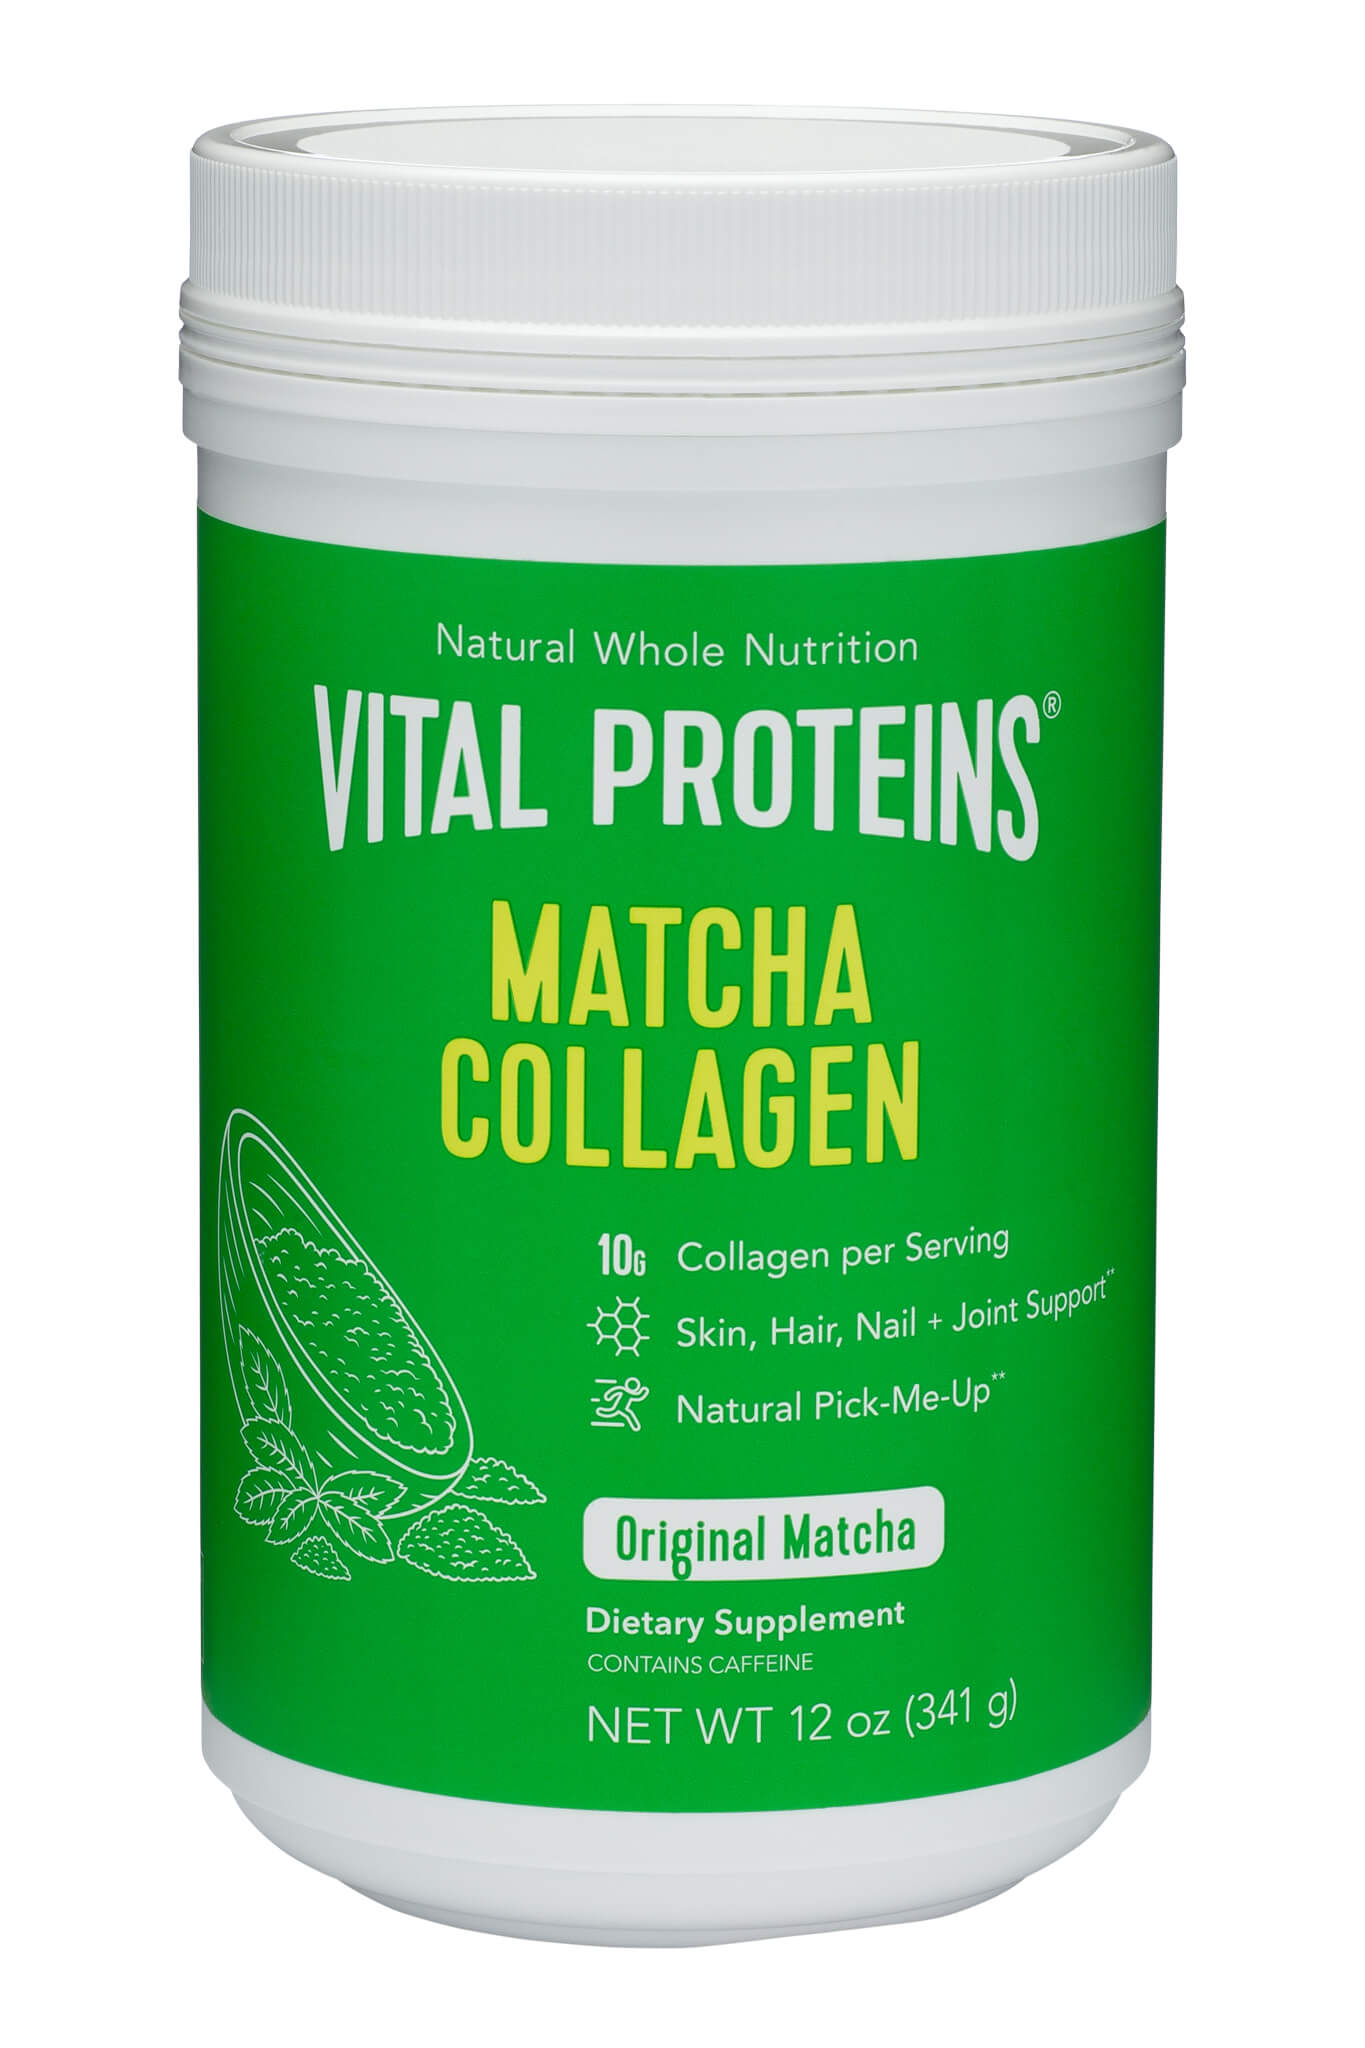 Vital Proteins Matcha Collagen A creamy delicious no fruit smoothie. High in protein and good for you fats, low in carbohydrates and sugar. This no-fruit matcha avocado smoothie is my new breakfast BFF!